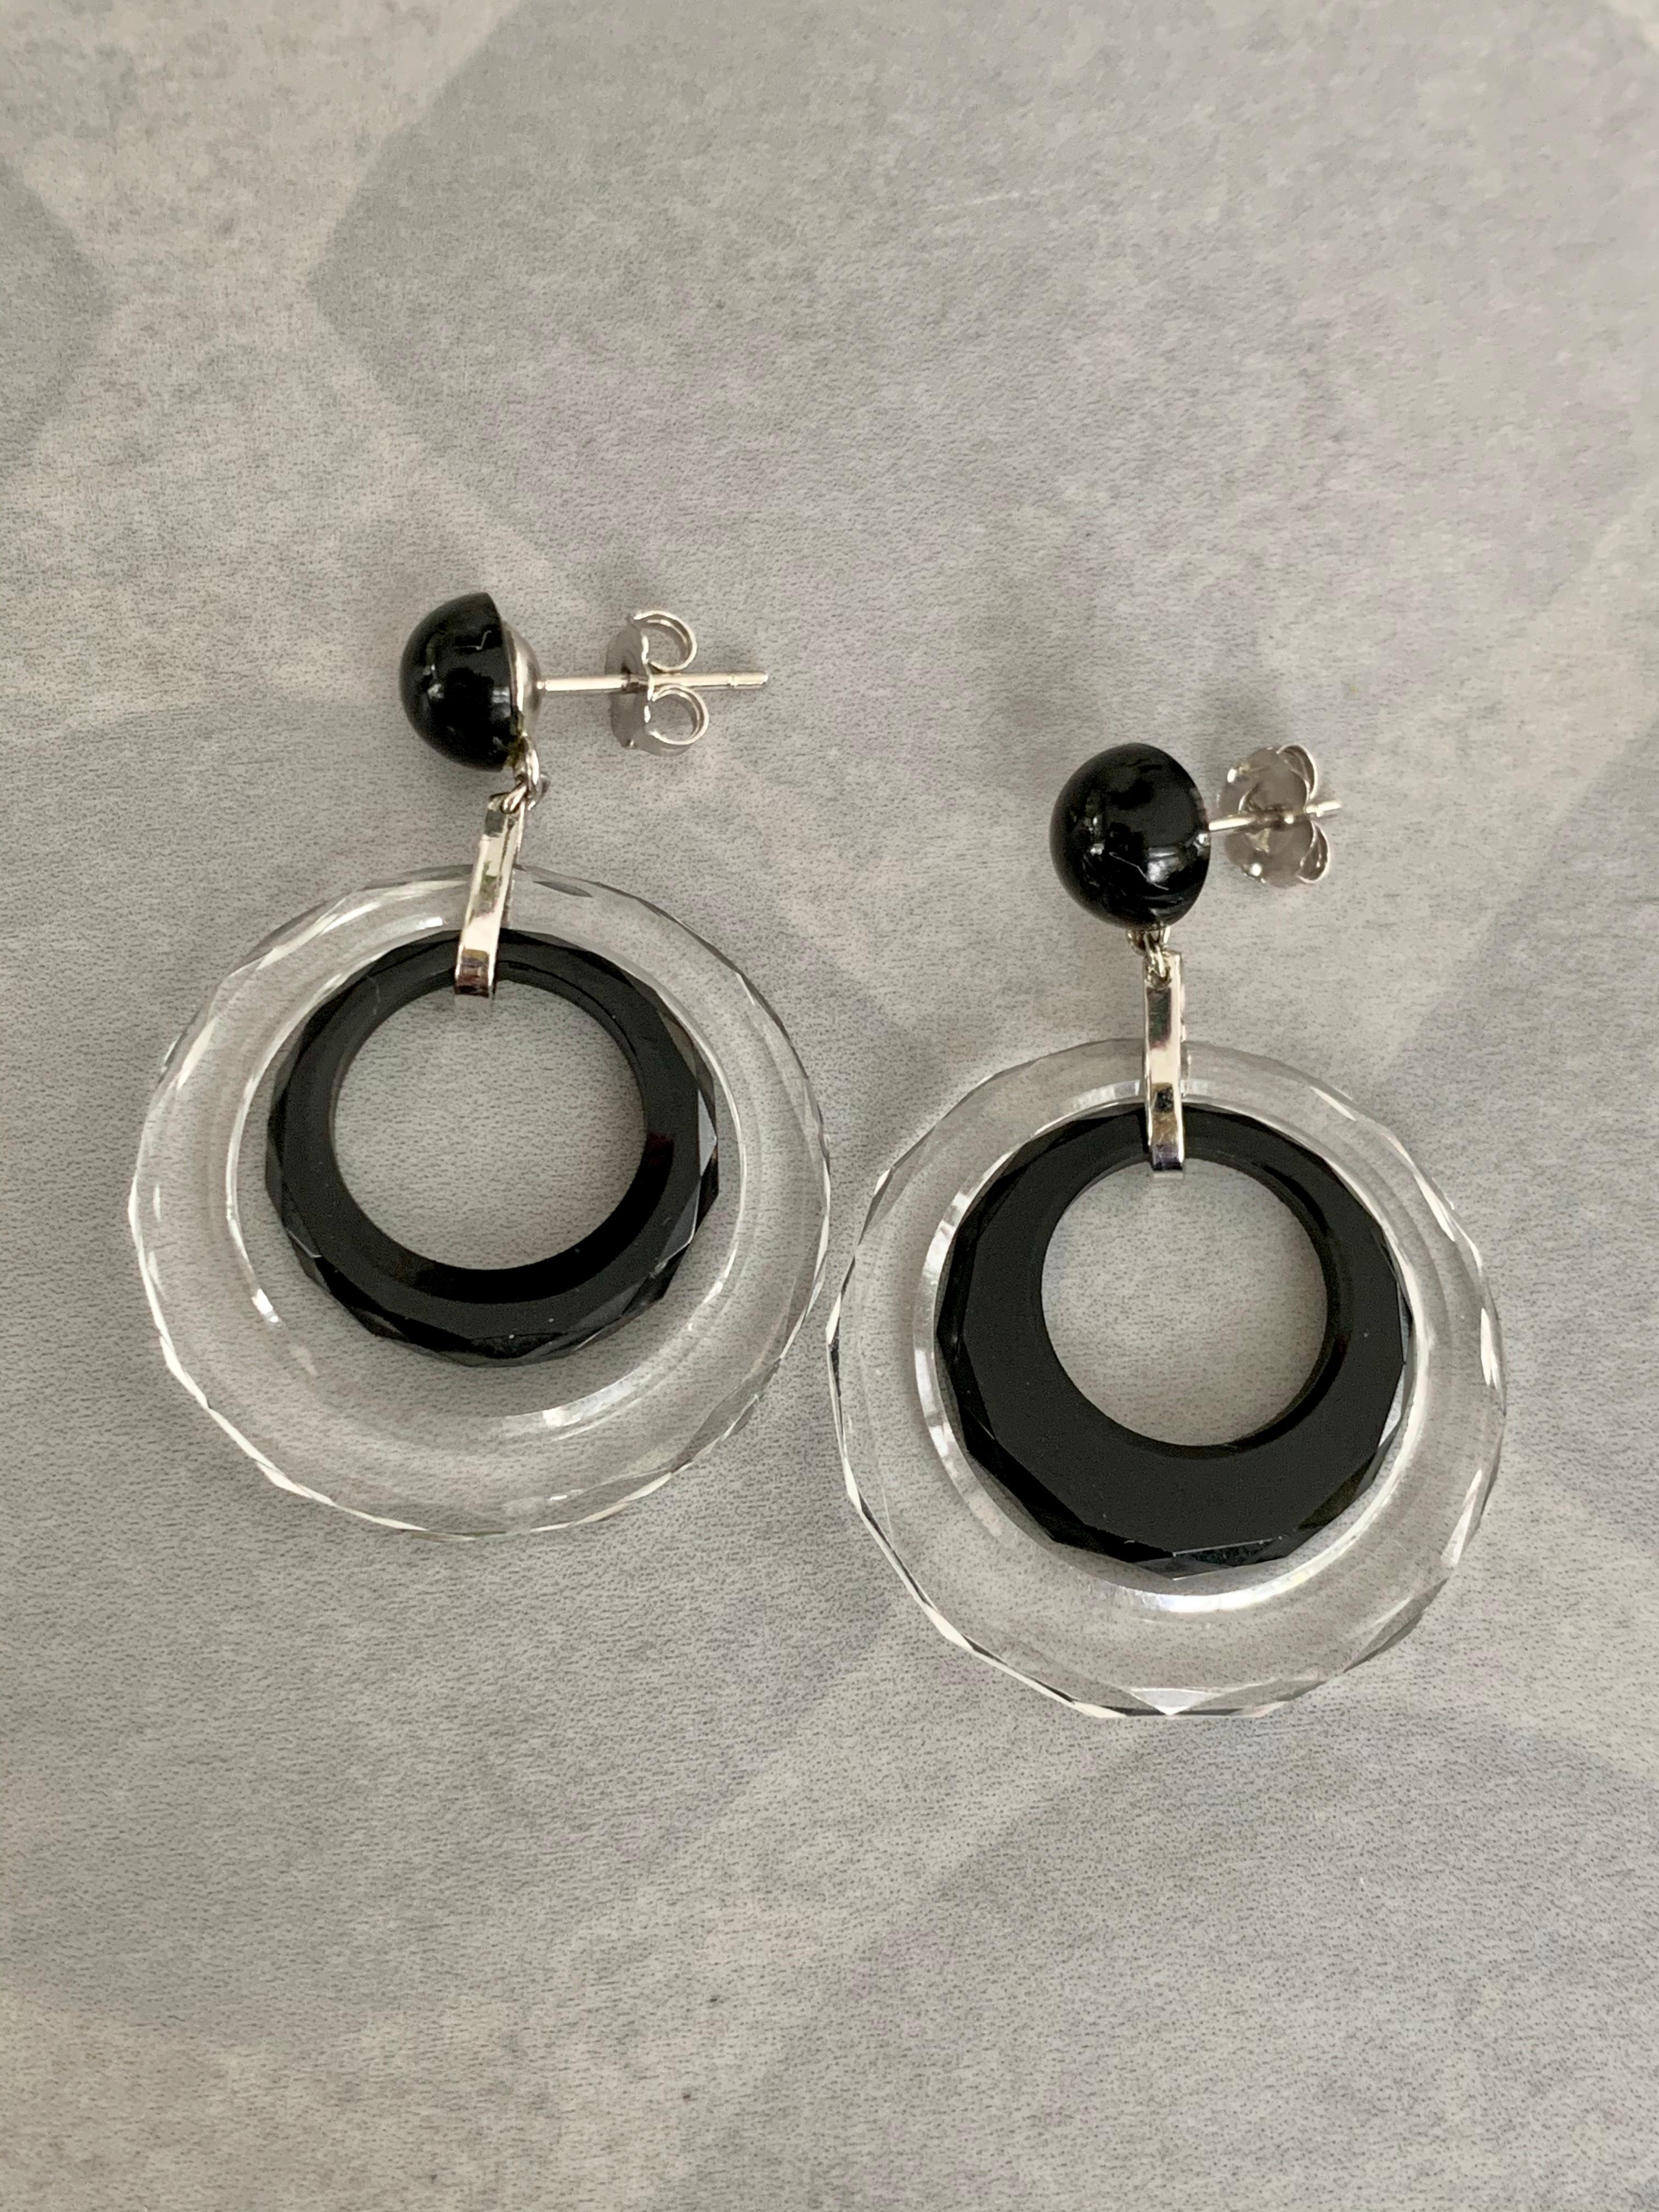 These very fun and modern looking earrings, feature an inner hoop of black Onyx, surrounded by a hoop of Crystal.  Black Onyx round stone is also featured on the post of each earring.  Posts and connecting loop are both 14 karat white Gold. 

Size: 